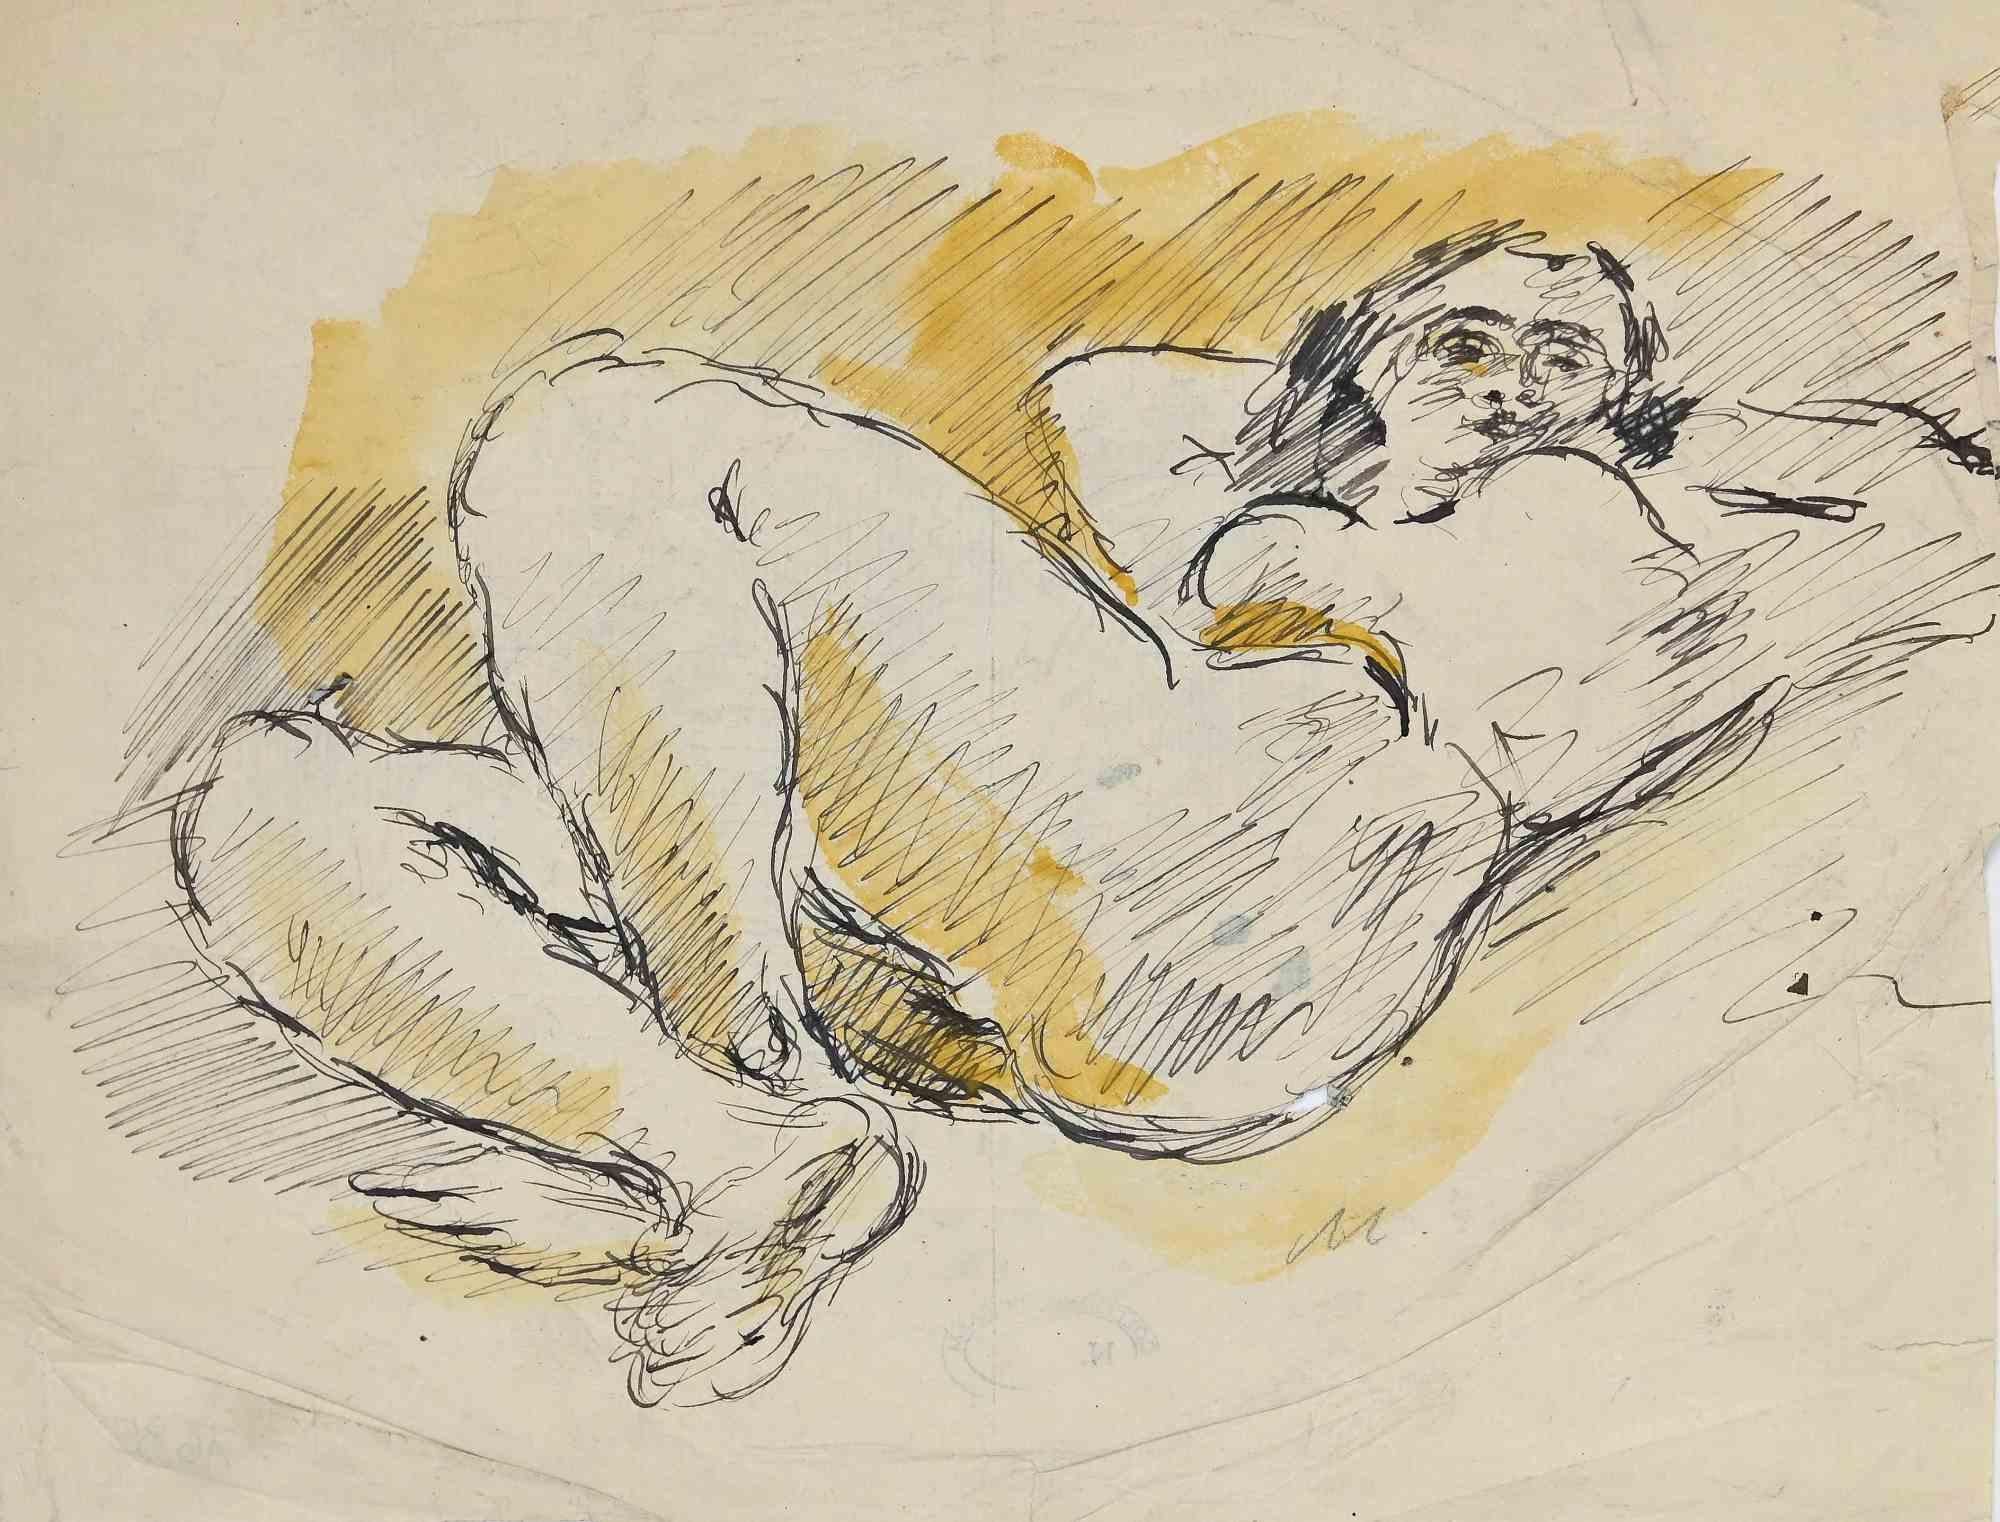 Reclined Nude - China Ink and Watercolor By Mino Maccari-Mid 20th century